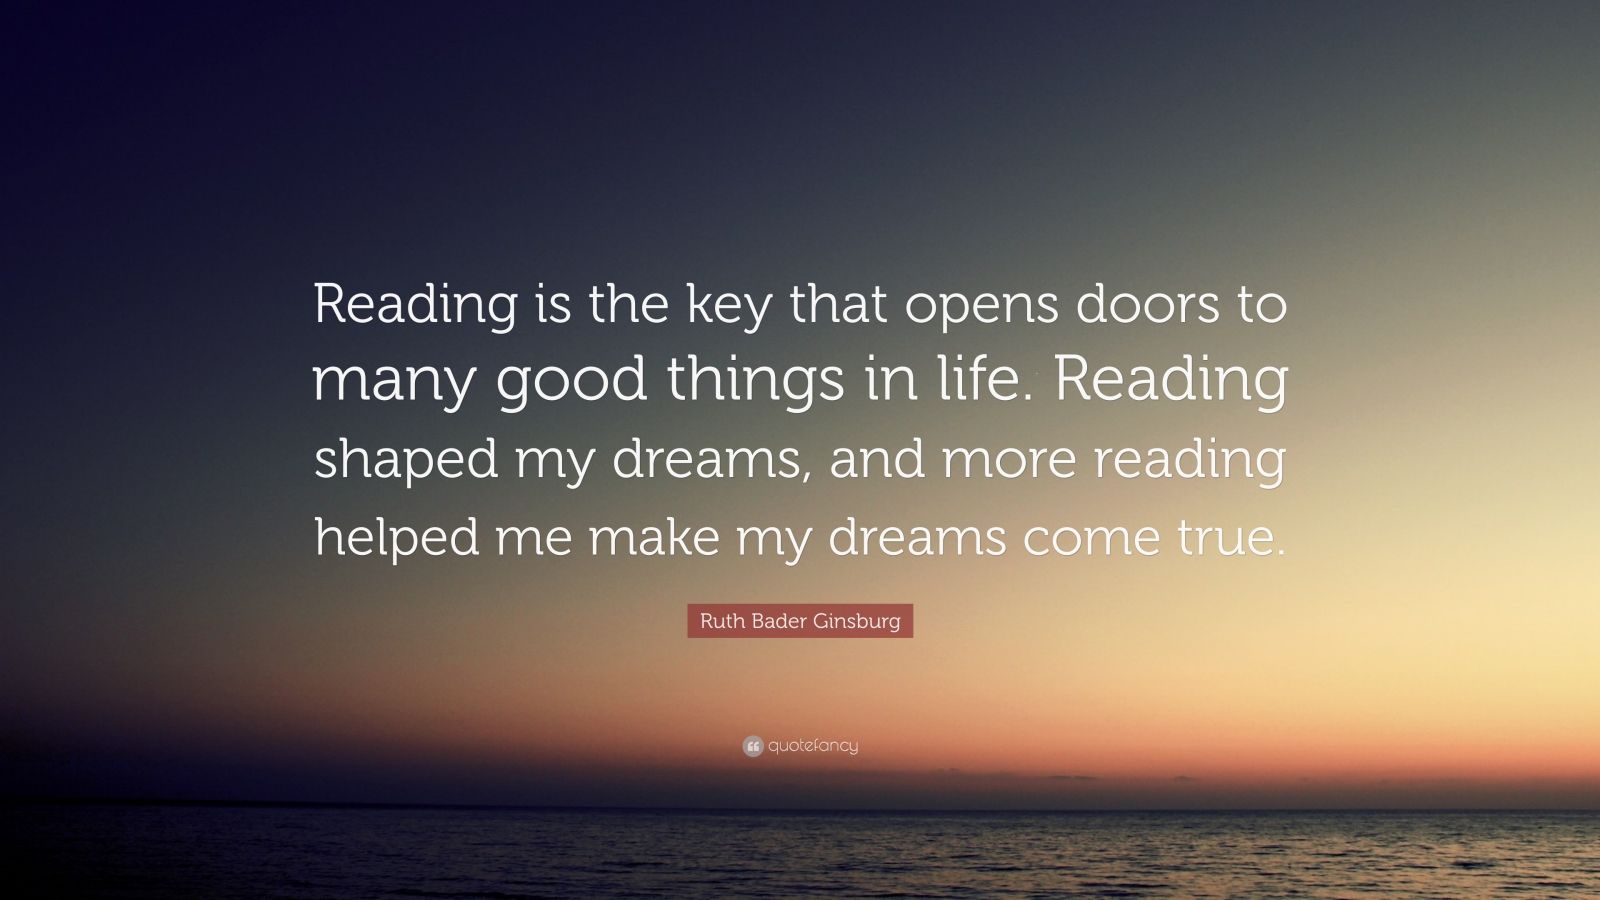 Ruth Bader Ginsburg Quote: “Reading is the key that opens doors to many